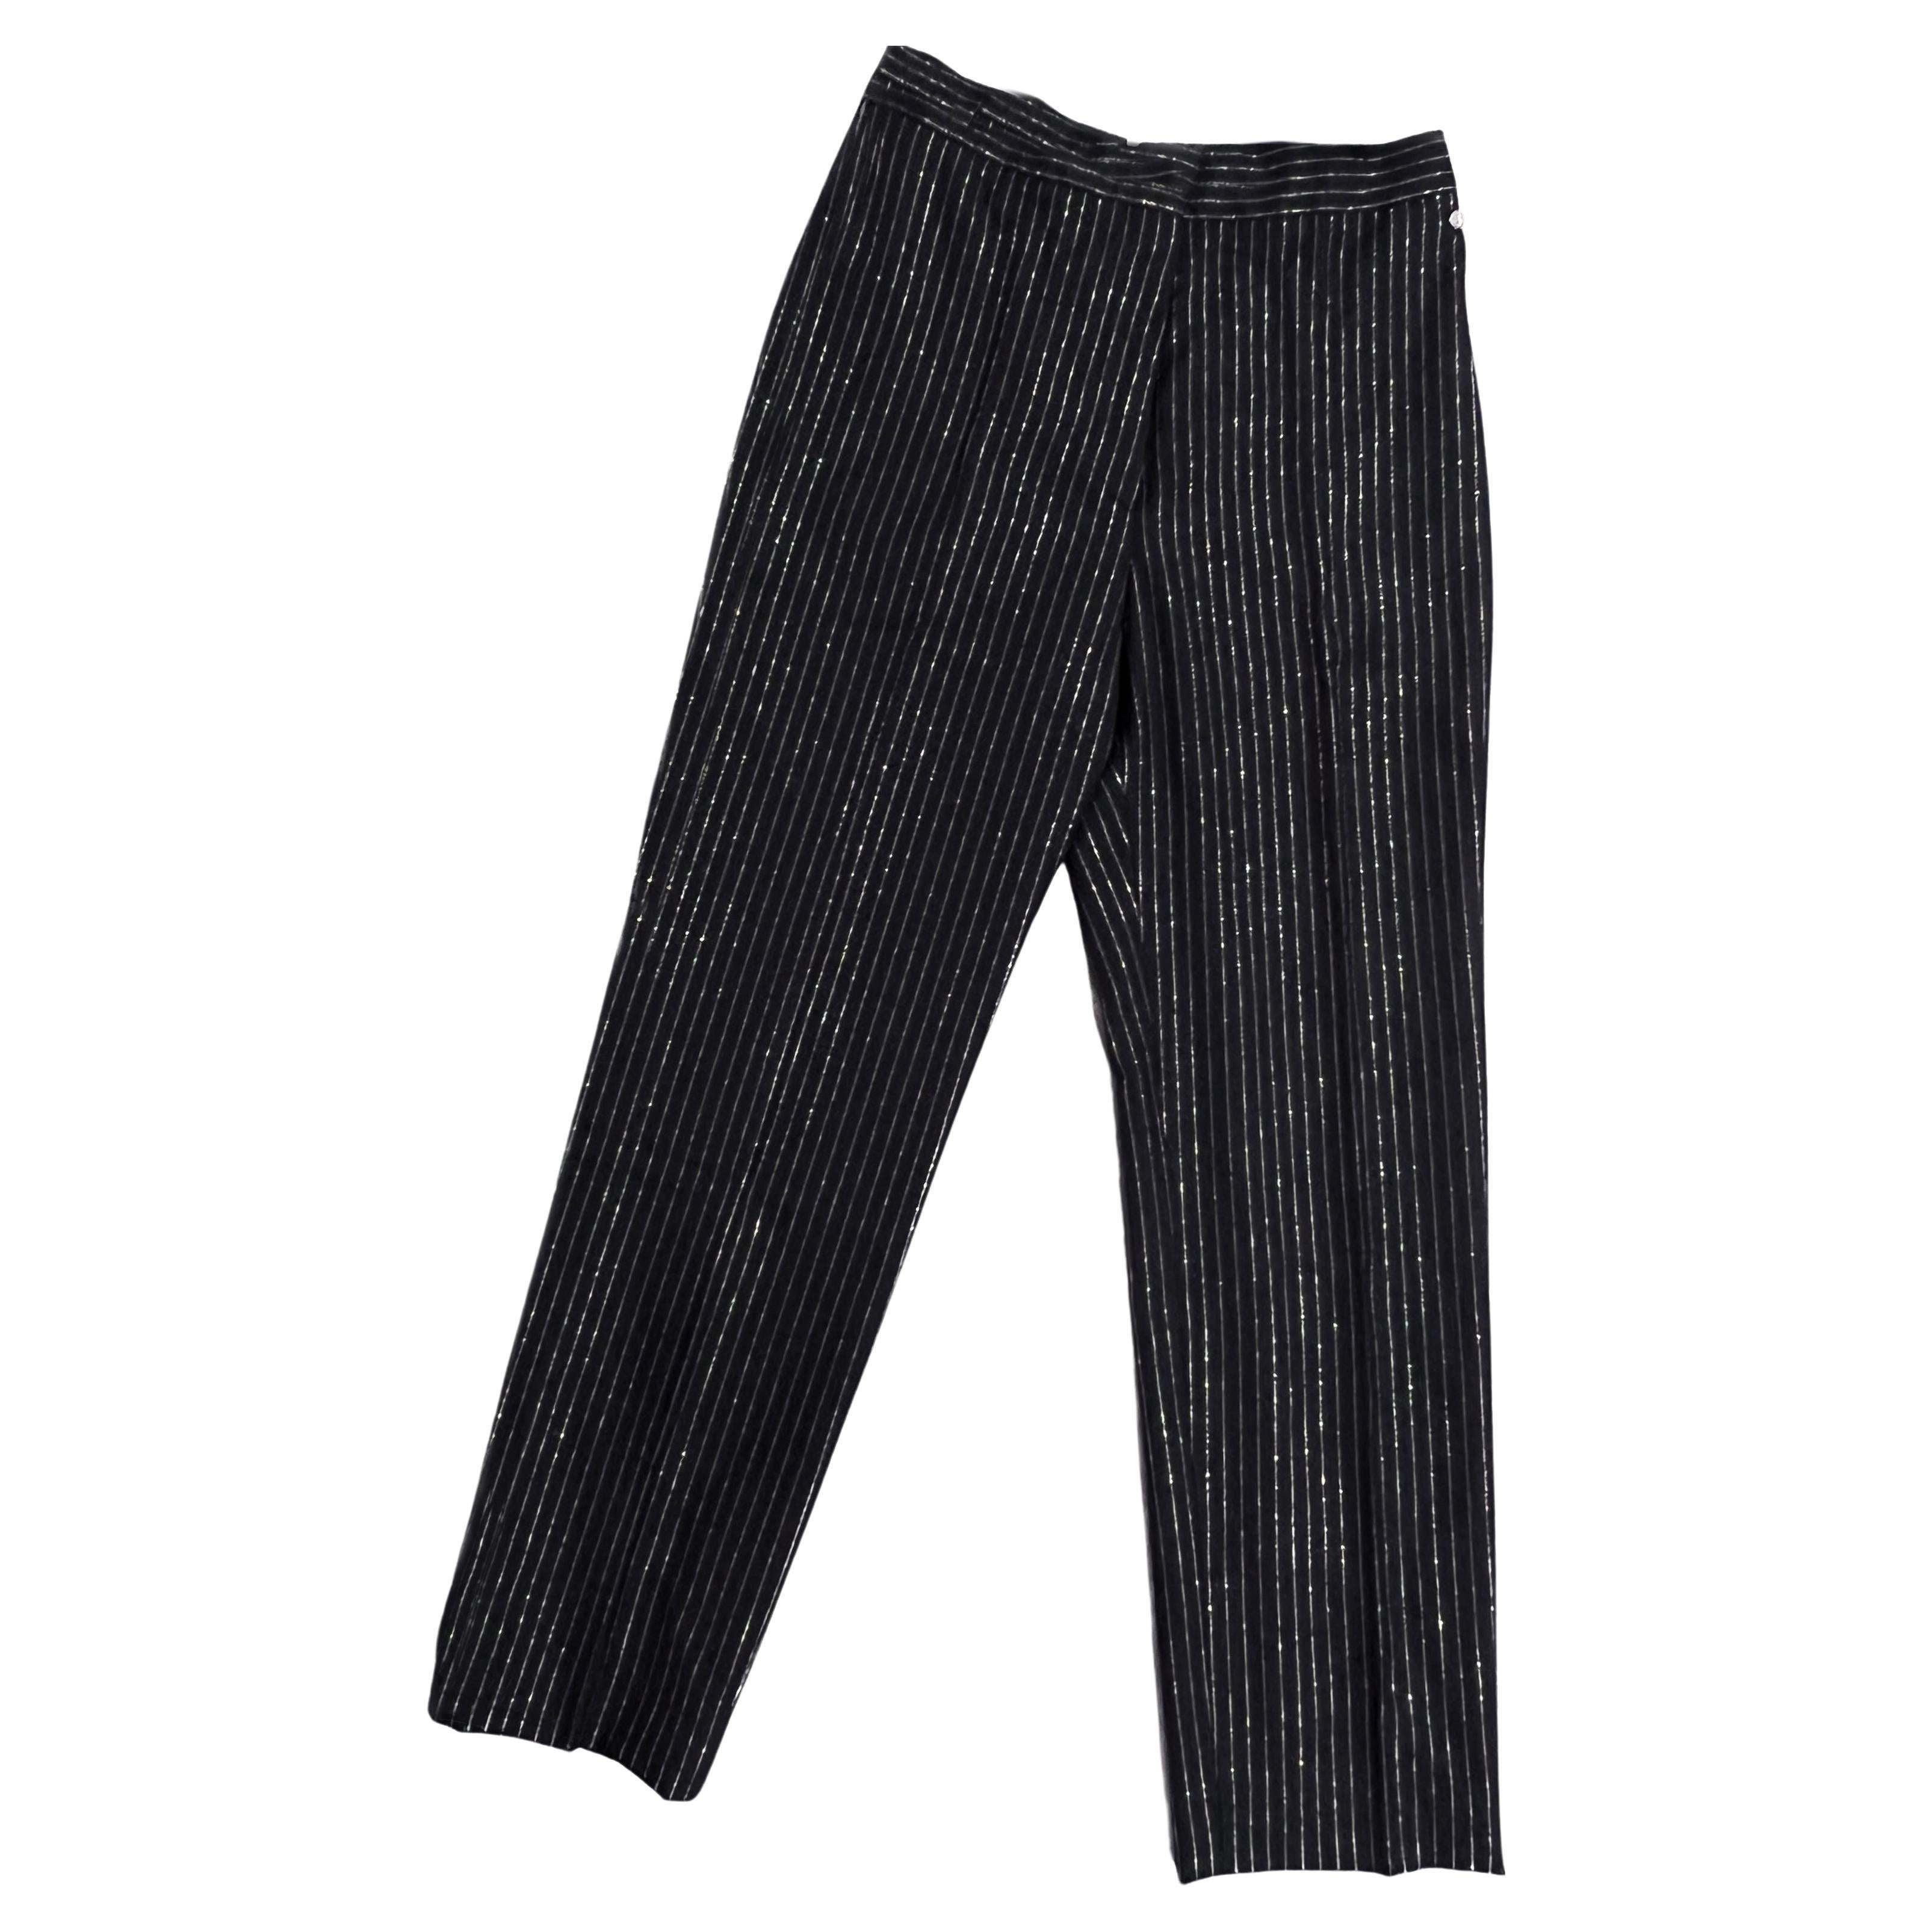 Chanel & Karl Lagerfeld Vintage 97 C90S 1997 Cruise Pants / Jeans